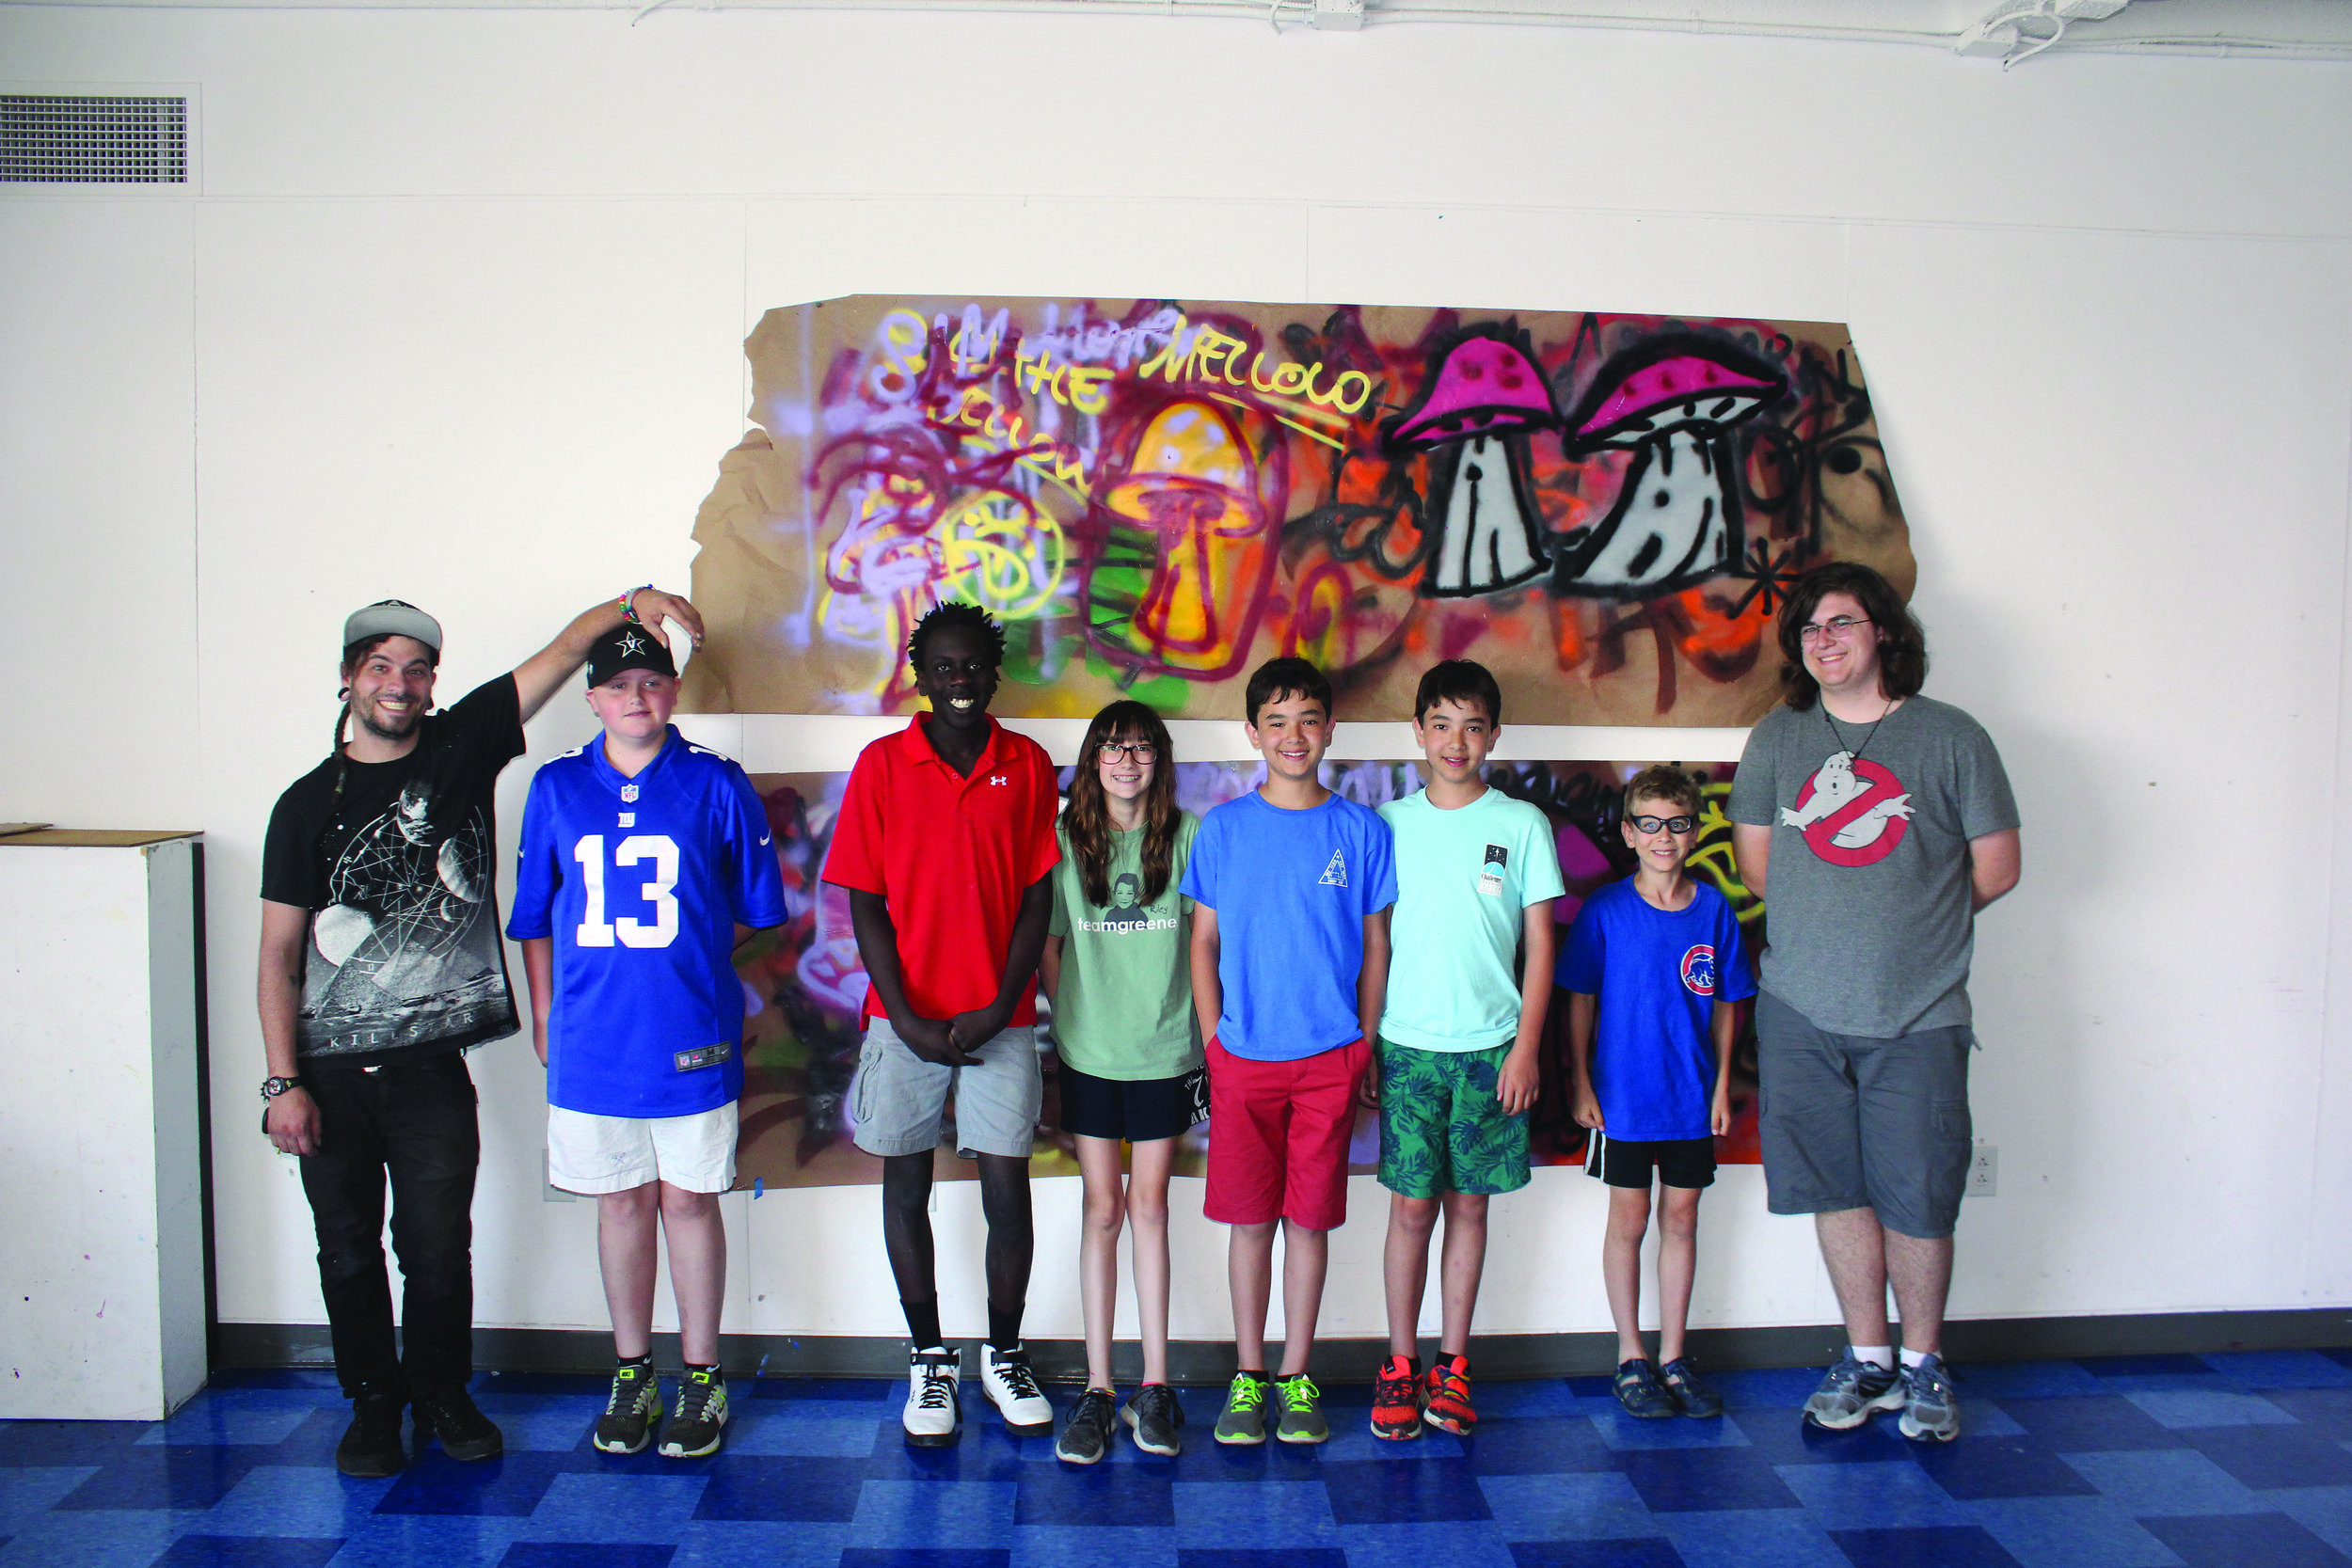 A group of teenagers stand in line for a picture in front of graffiti art.